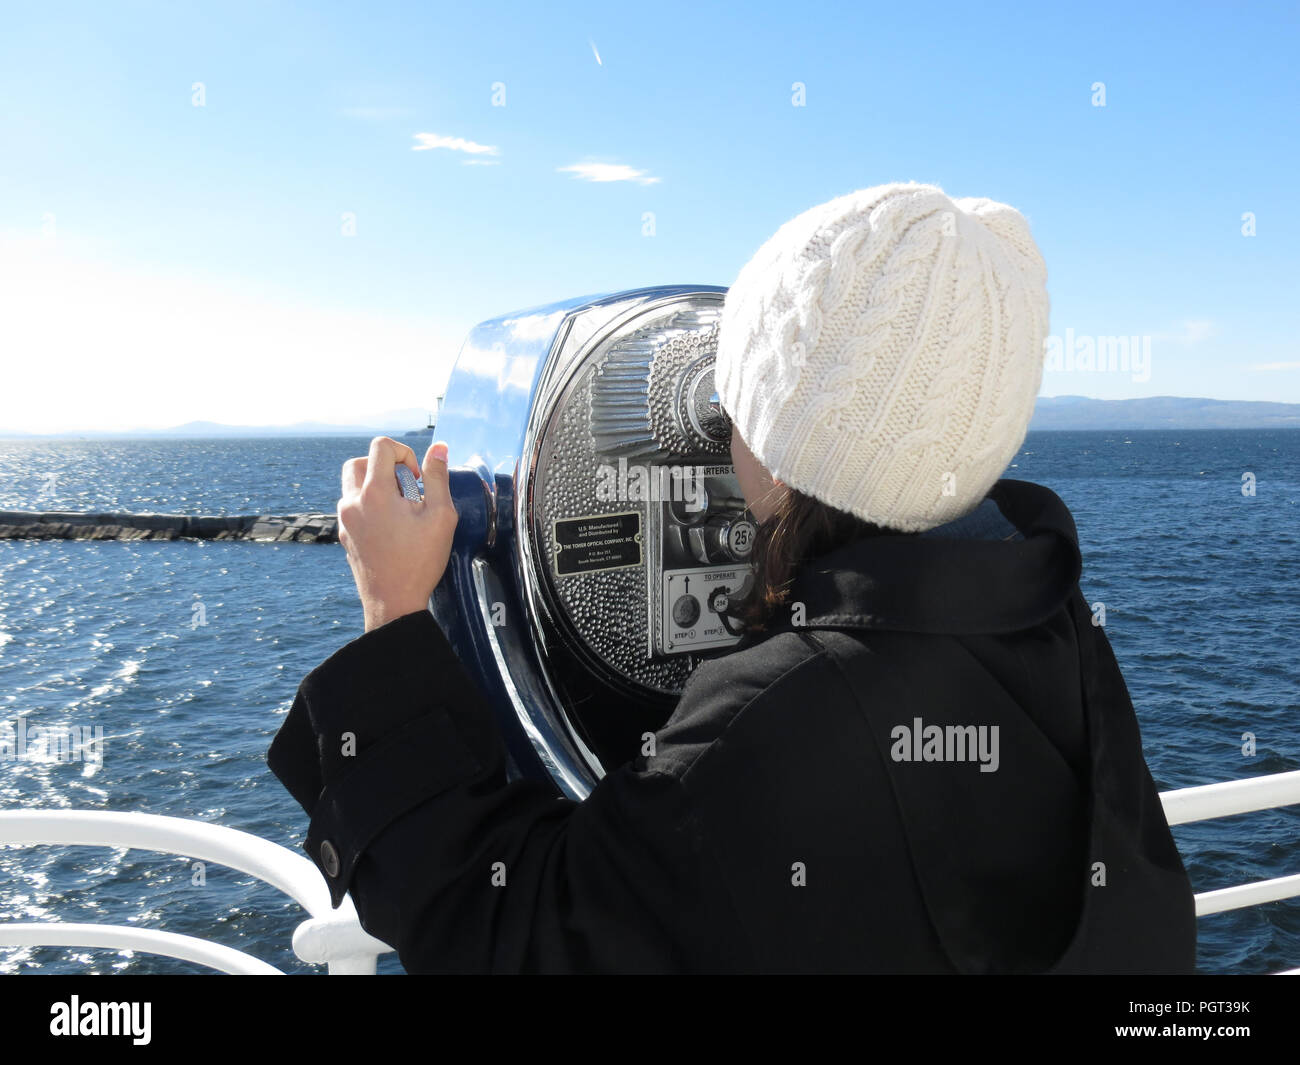 Young girl, dressed for winter, looking through binoculars at the ocean from the deck of a boat. Stock Photo